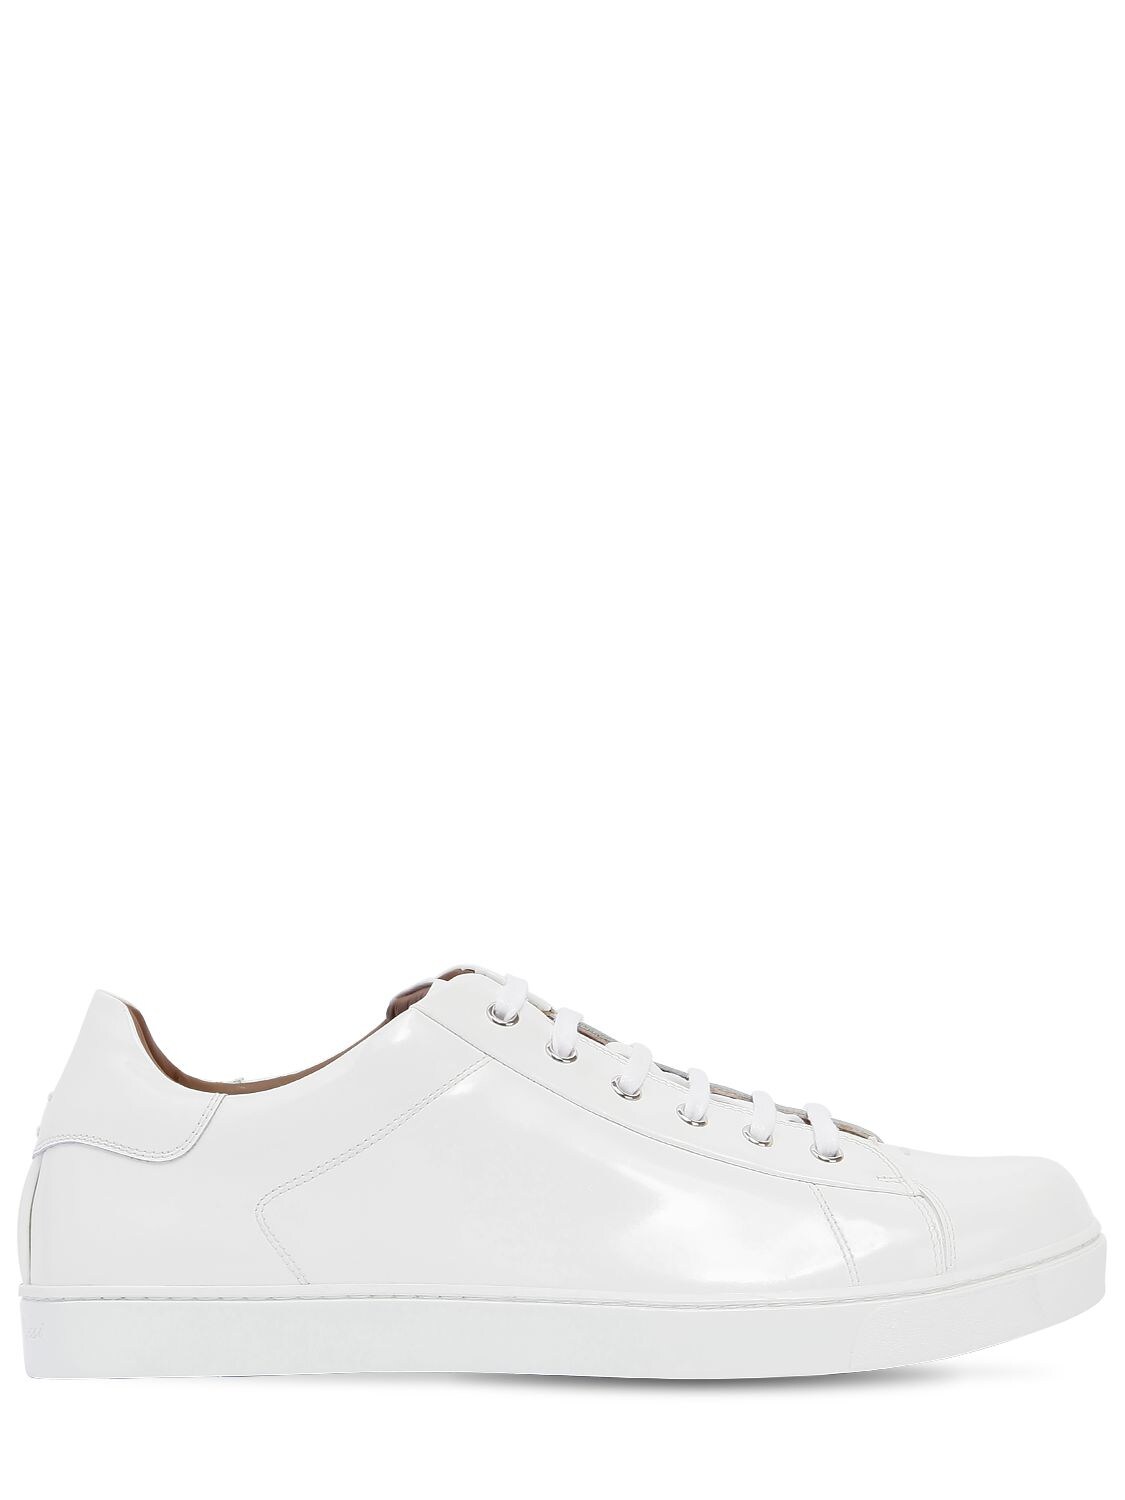 GIANVITO ROSSI POLISHED PATENT LEATHER SNEAKERS,67IR6E001-V0hJVEU1